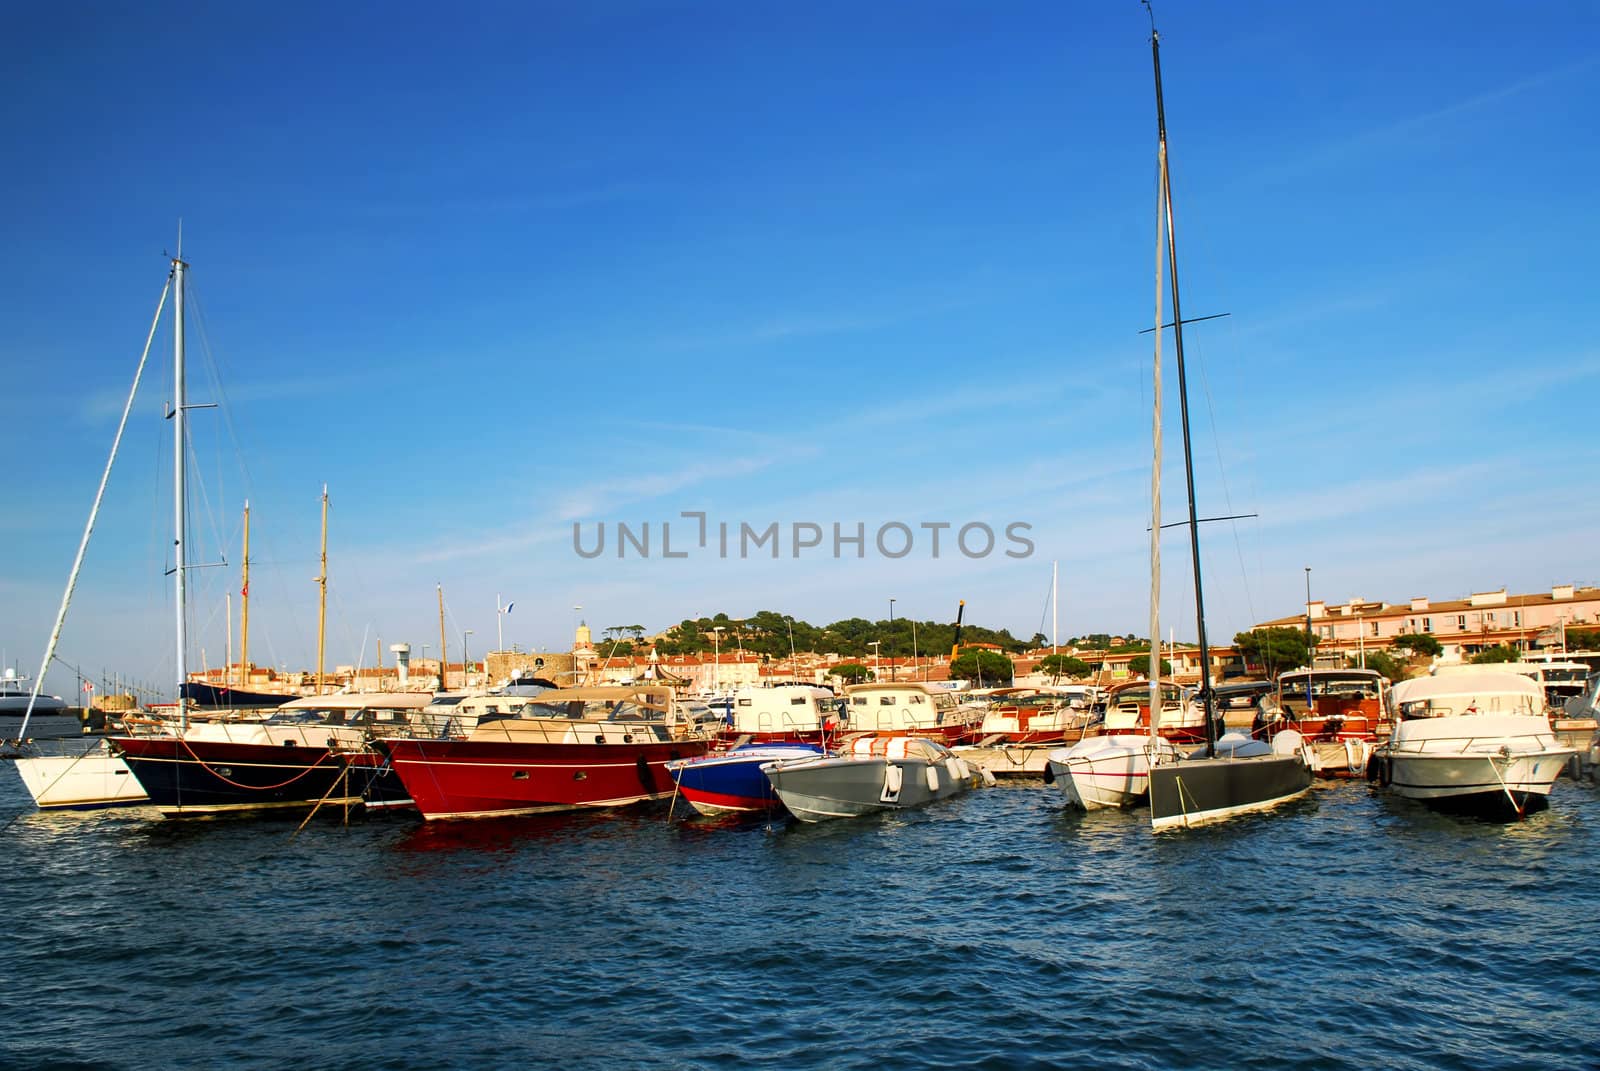 Boats at St.Tropez by elenathewise